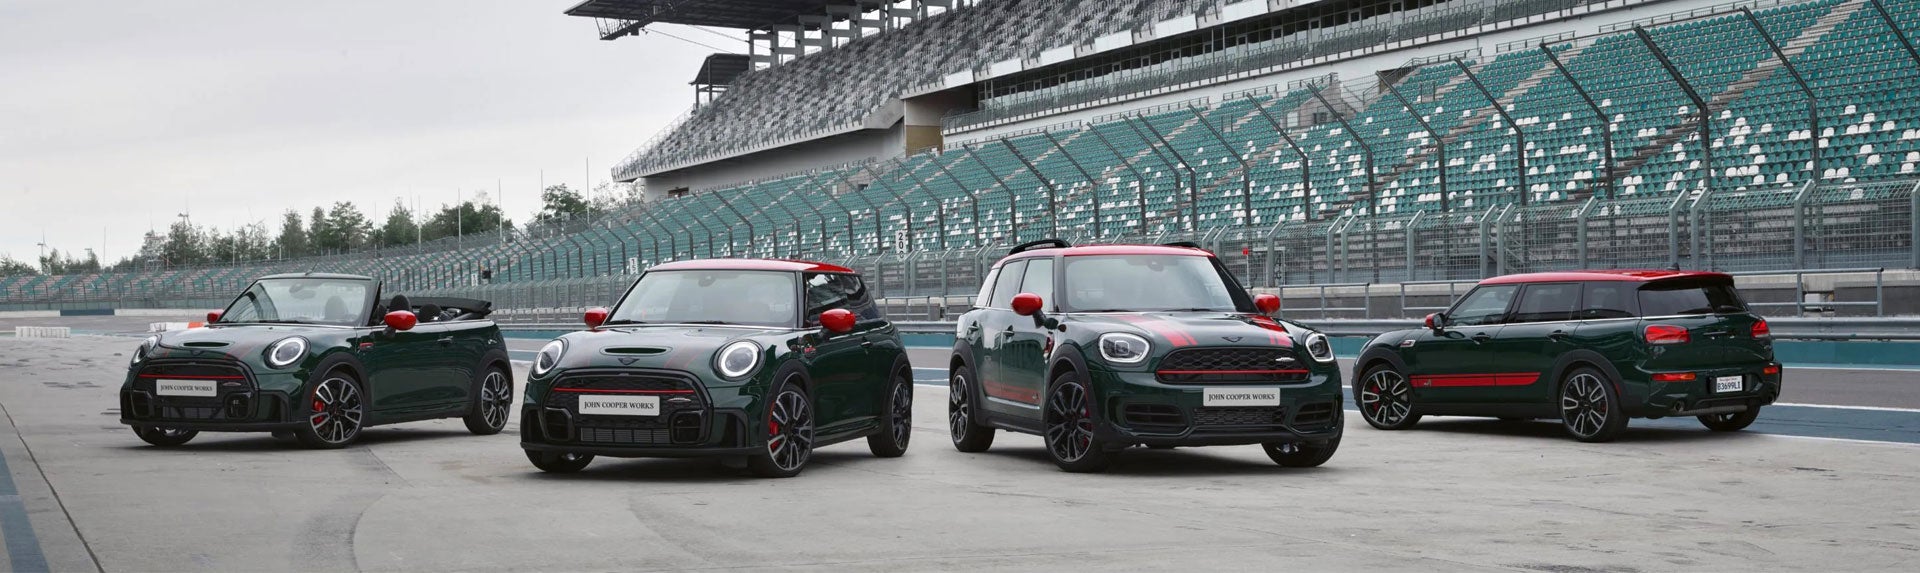 Family of four MINI John Cooper Works models parked on a race track. | MINIDemo2 in Derwood MD